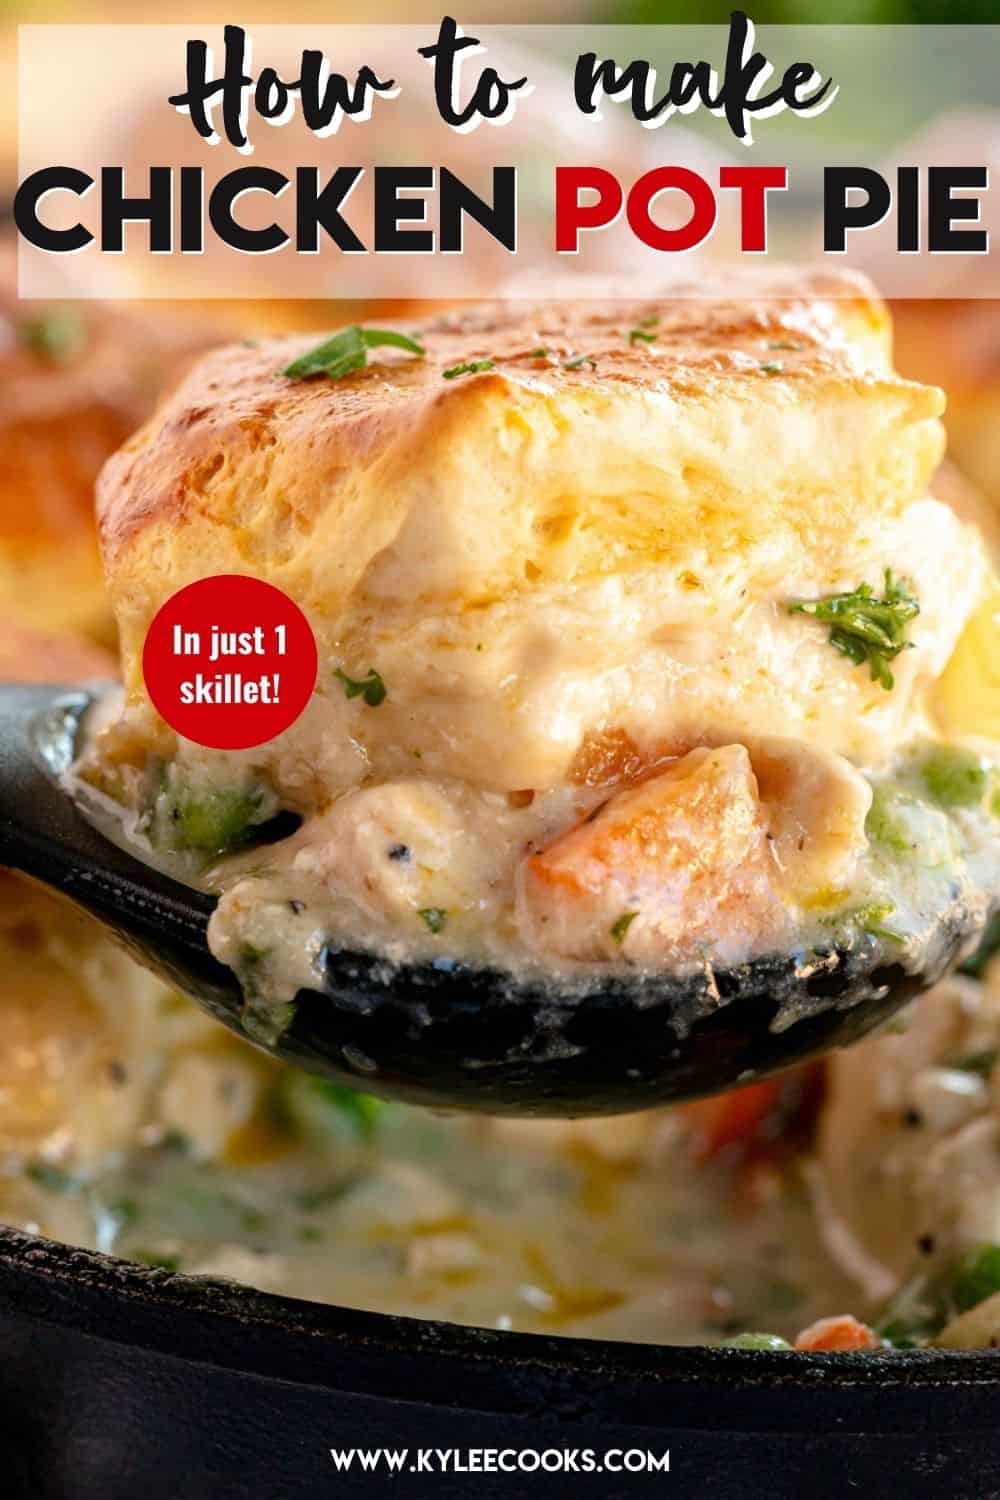 biscuit chicken pot pie with recipe name overlaid in text